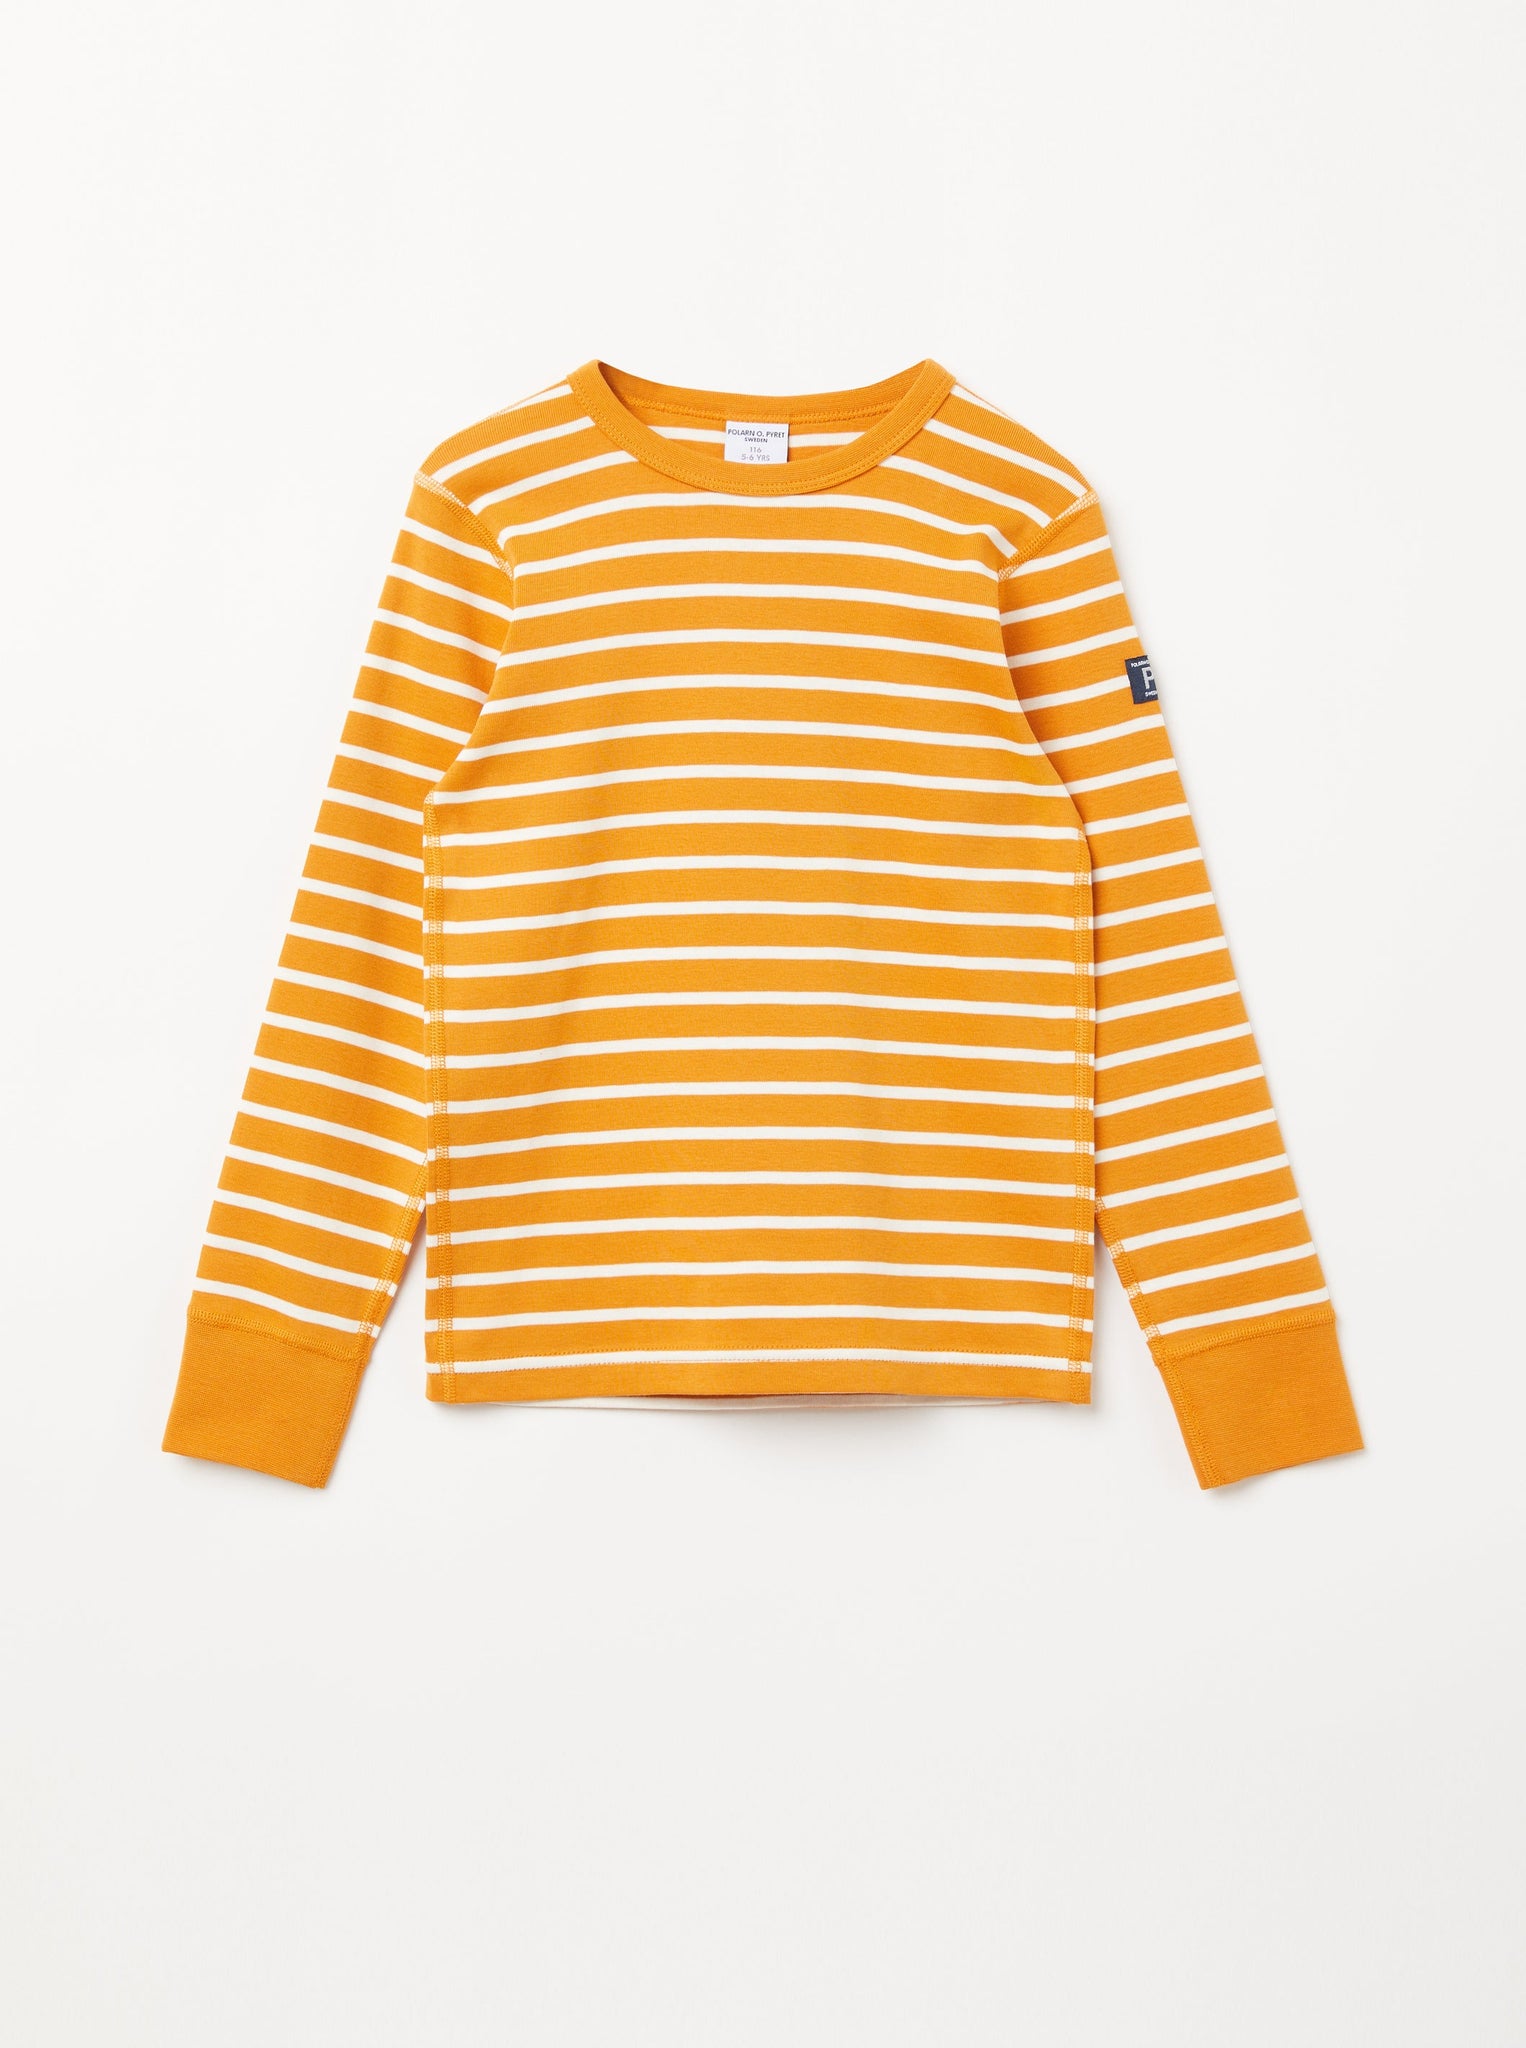 Organic Cotton Striped Yellow Kids Top from the Polarn O. Pyret Kidswear collection. The best ethical kids clothes